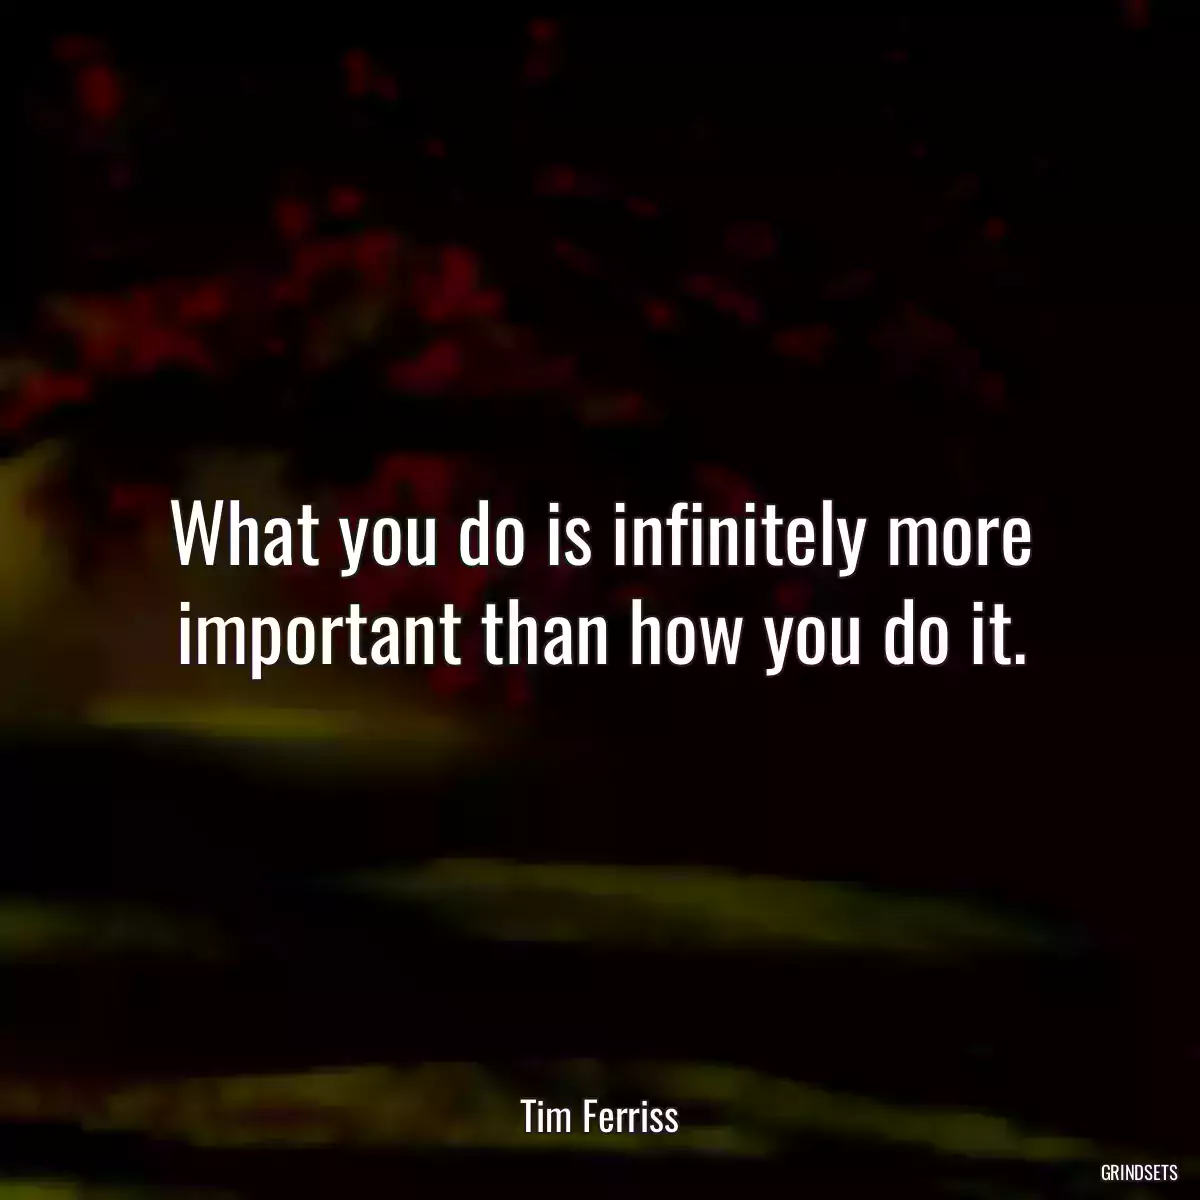 What you do is infinitely more important than how you do it.